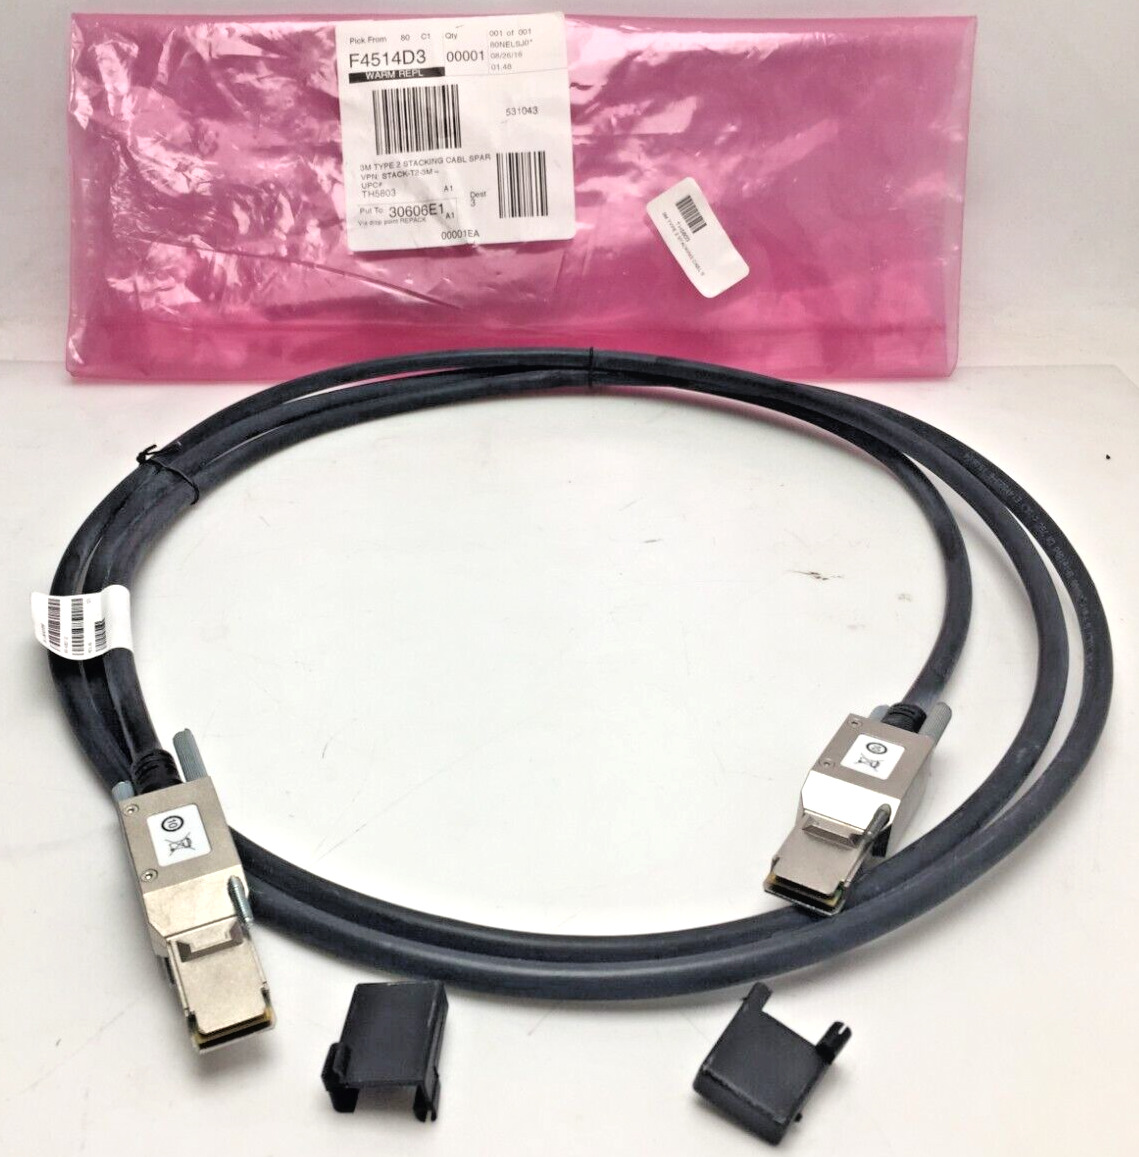 STACK-T2-3M  (Cisco) 3M Type 2 Stacking Cable Spare  NEW(Old Stock)